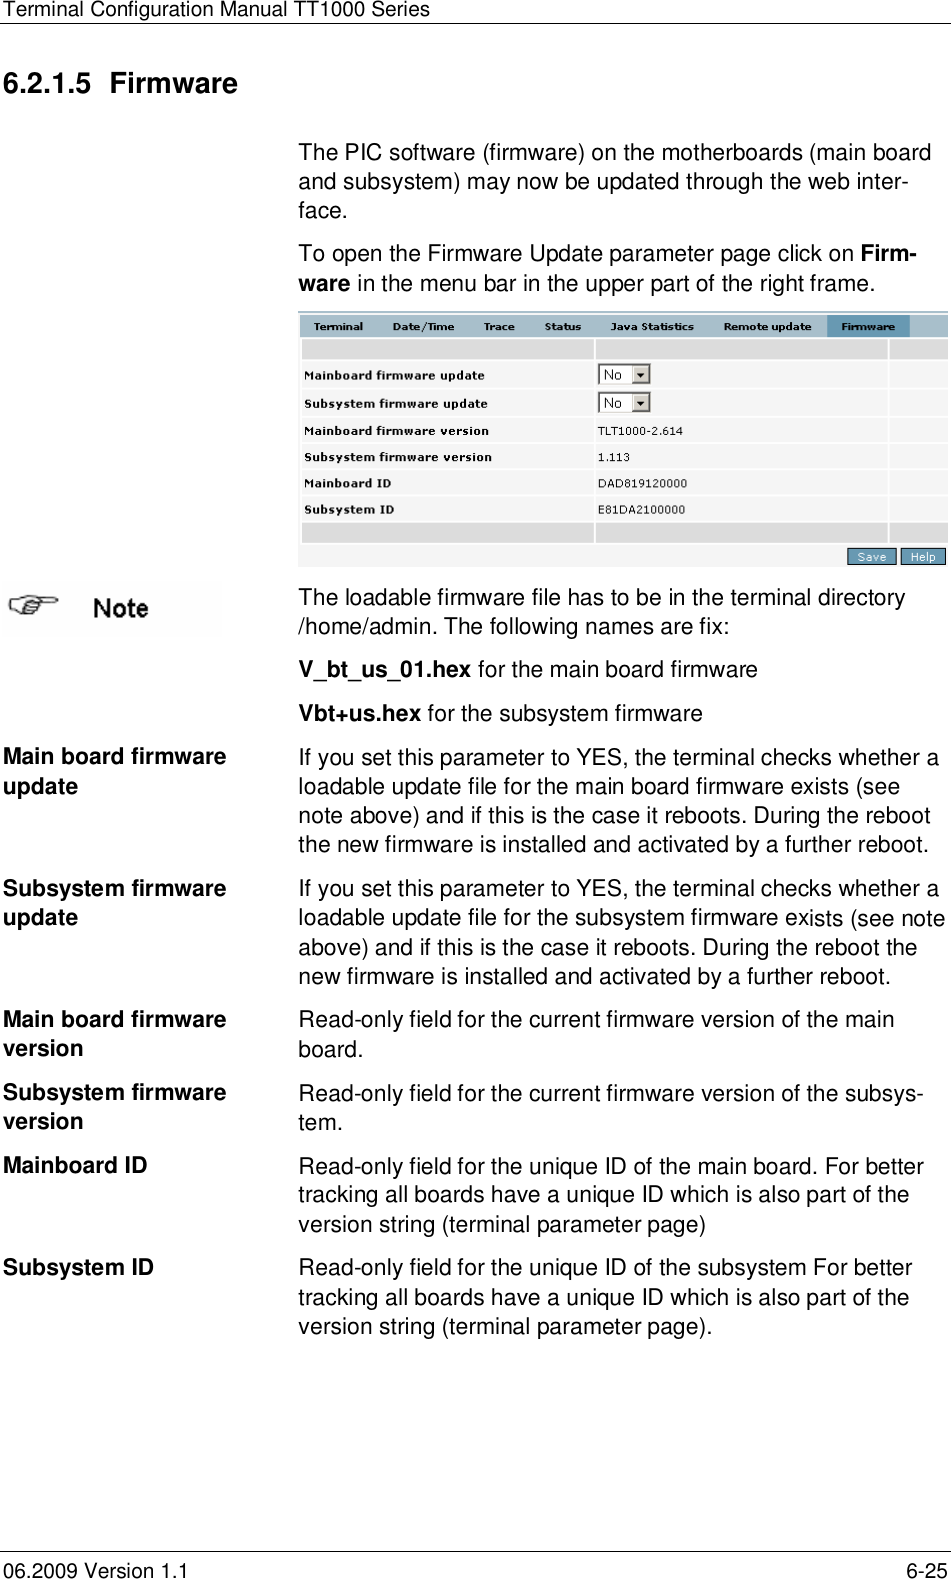 Terminal Configuration Manual TT1000 Series06.2009 Version 1.1 6-256.2.1.5 FirmwareThe PIC software (firmware) on the motherboards (main boardand subsystem) may now be updated through the web inter-face.To open the Firmware Update parameter page click on Firm-ware in the menu bar in the upper part of the right frame.The loadable firmware file has to be in the terminal directory/home/admin. The following names are fix:V_bt_us_01.hex for the main board firmwareVbt+us.hex for the subsystem firmwareMain board firmwareupdate If you set this parameter to YES, the terminal checks whether aloadable update file for the main board firmware exists (seenote above) and if this is the case it reboots. During the rebootthe new firmware is installed and activated by a further reboot.Subsystem firmwareupdate If you set this parameter to YES, the terminal checks whether aloadable update file for the subsystem firmware exists (see noteabove) and if this is the case it reboots. During the reboot thenew firmware is installed and activated by a further reboot.Main board firmwareversion Read-only field for the current firmware version of the mainboard.Subsystem firmwareversion Read-only field for the current firmware version of the subsys-tem.Mainboard ID Read-only field for the unique ID of the main board. For bettertracking all boards have a unique ID which is also part of theversion string (terminal parameter page)Subsystem ID Read-only field for the unique ID of the subsystem For bettertracking all boards have a unique ID which is also part of theversion string (terminal parameter page).